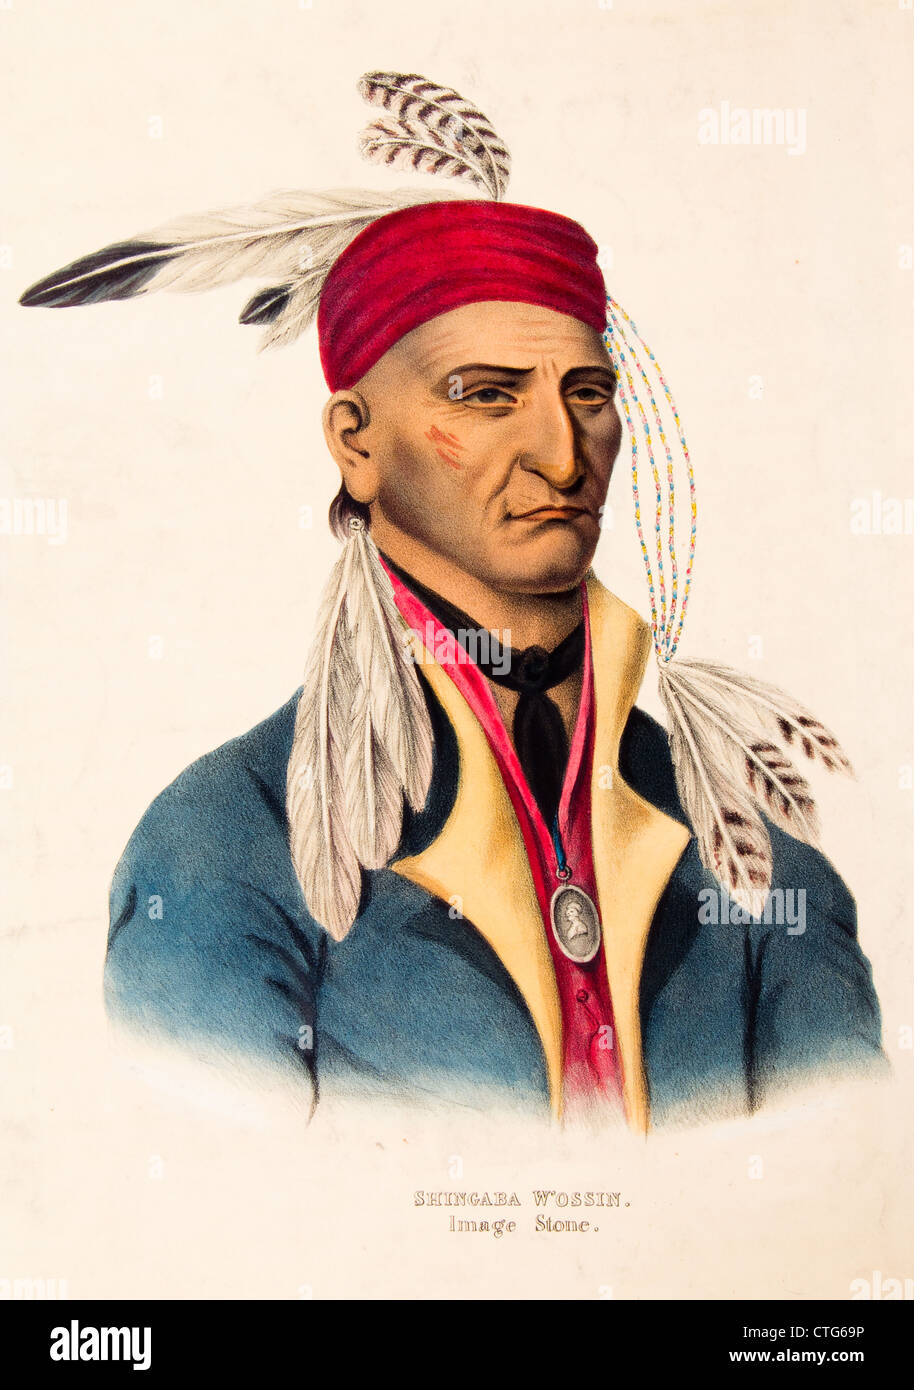 1800s PORTRAIT OF CHIPPEWA CHIEF IMAGE STONE OR SHINGABA W'OSSIN SIDED WITH THE BRITISH IN WAR OF 1812 Stock Photo